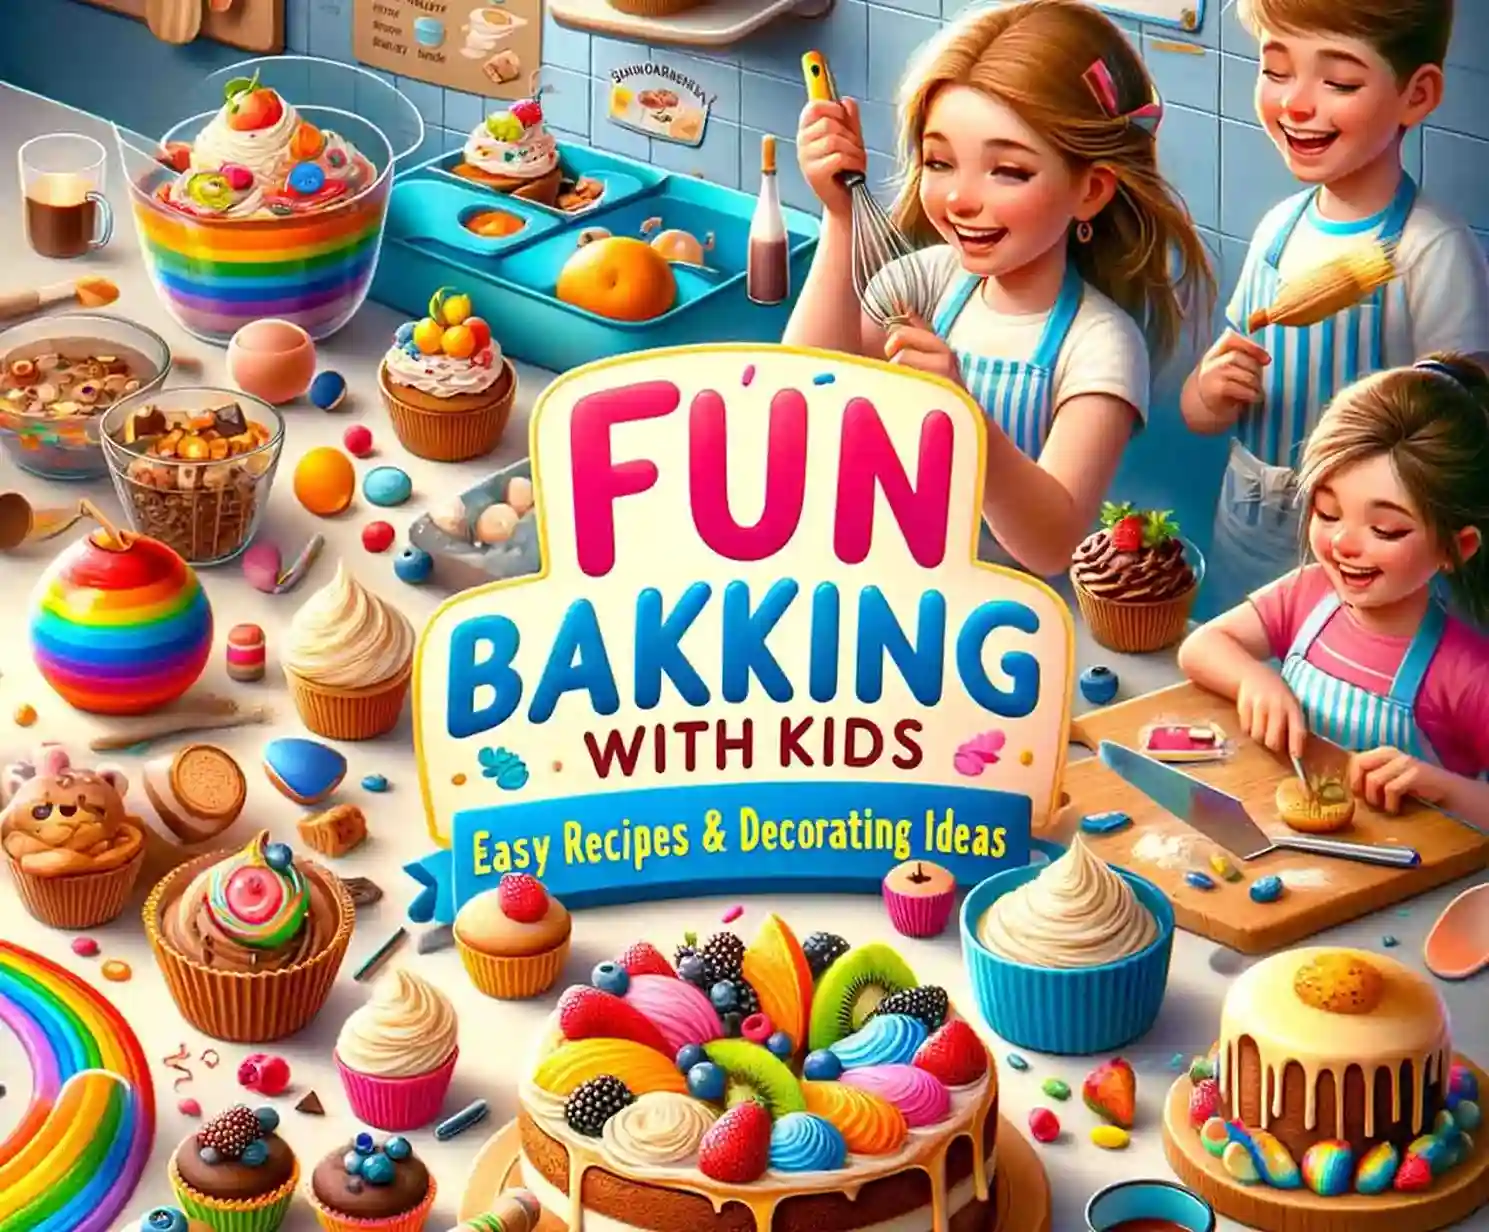 Fun Baking with Kids Easy Recipes & Decorating Ideas